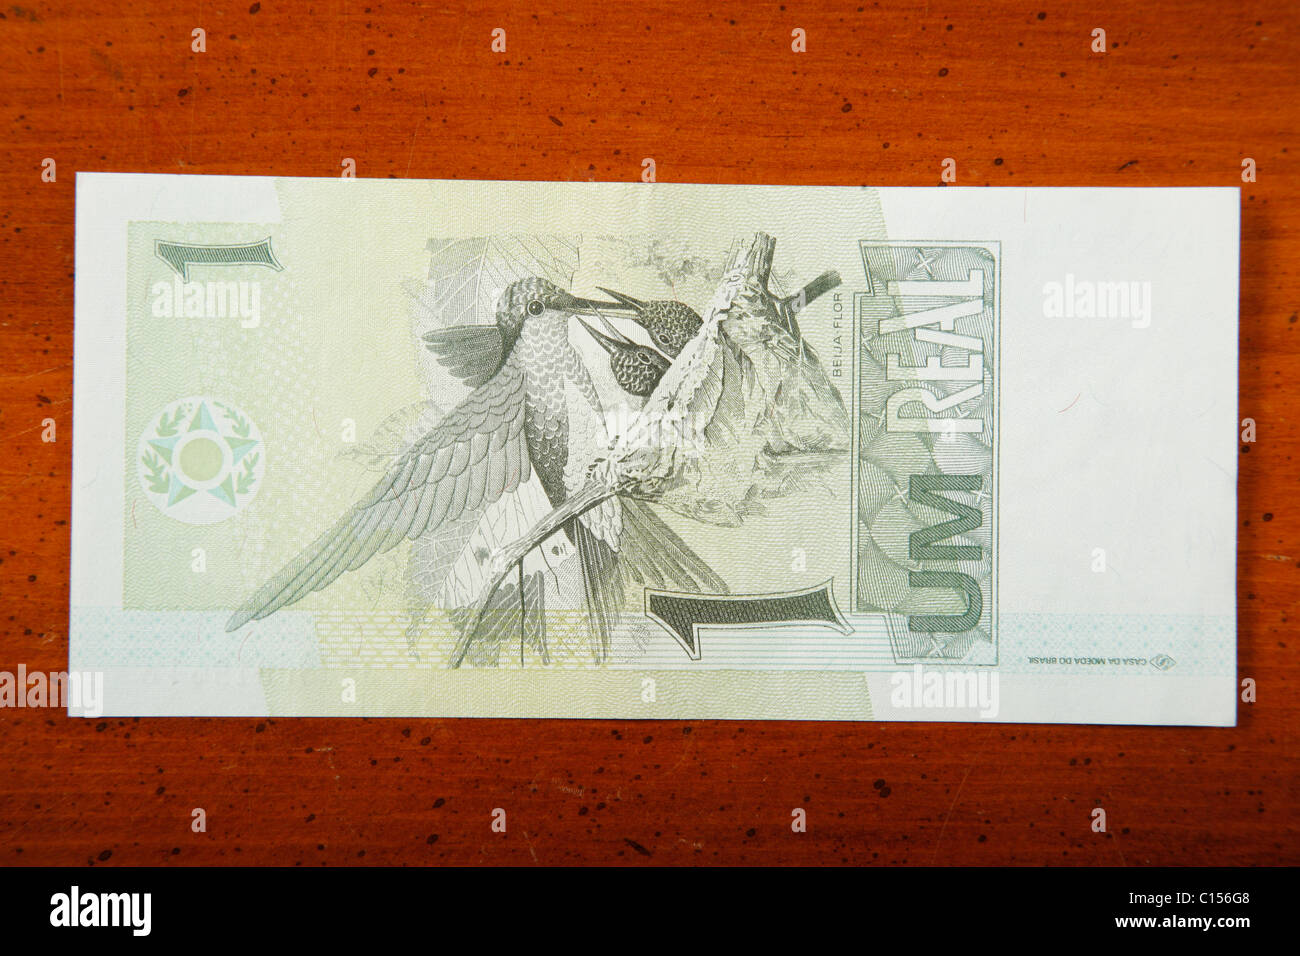 one Brazilian real currency bill on a table Stock Photo